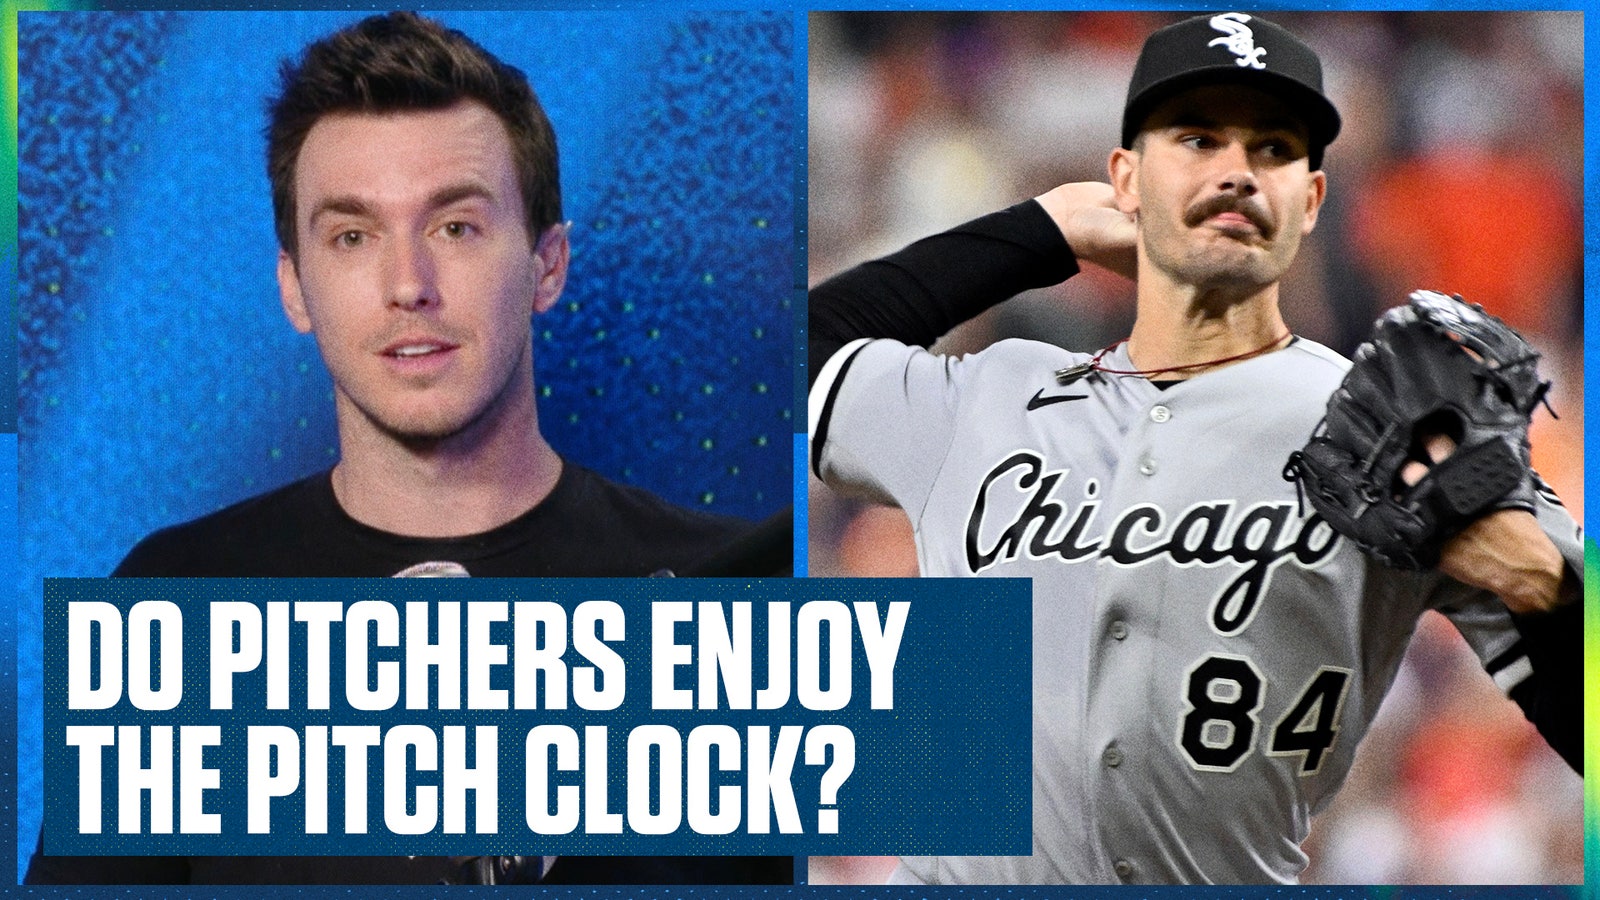 The pitch clock was a topic at the All-Star Game. But how will it